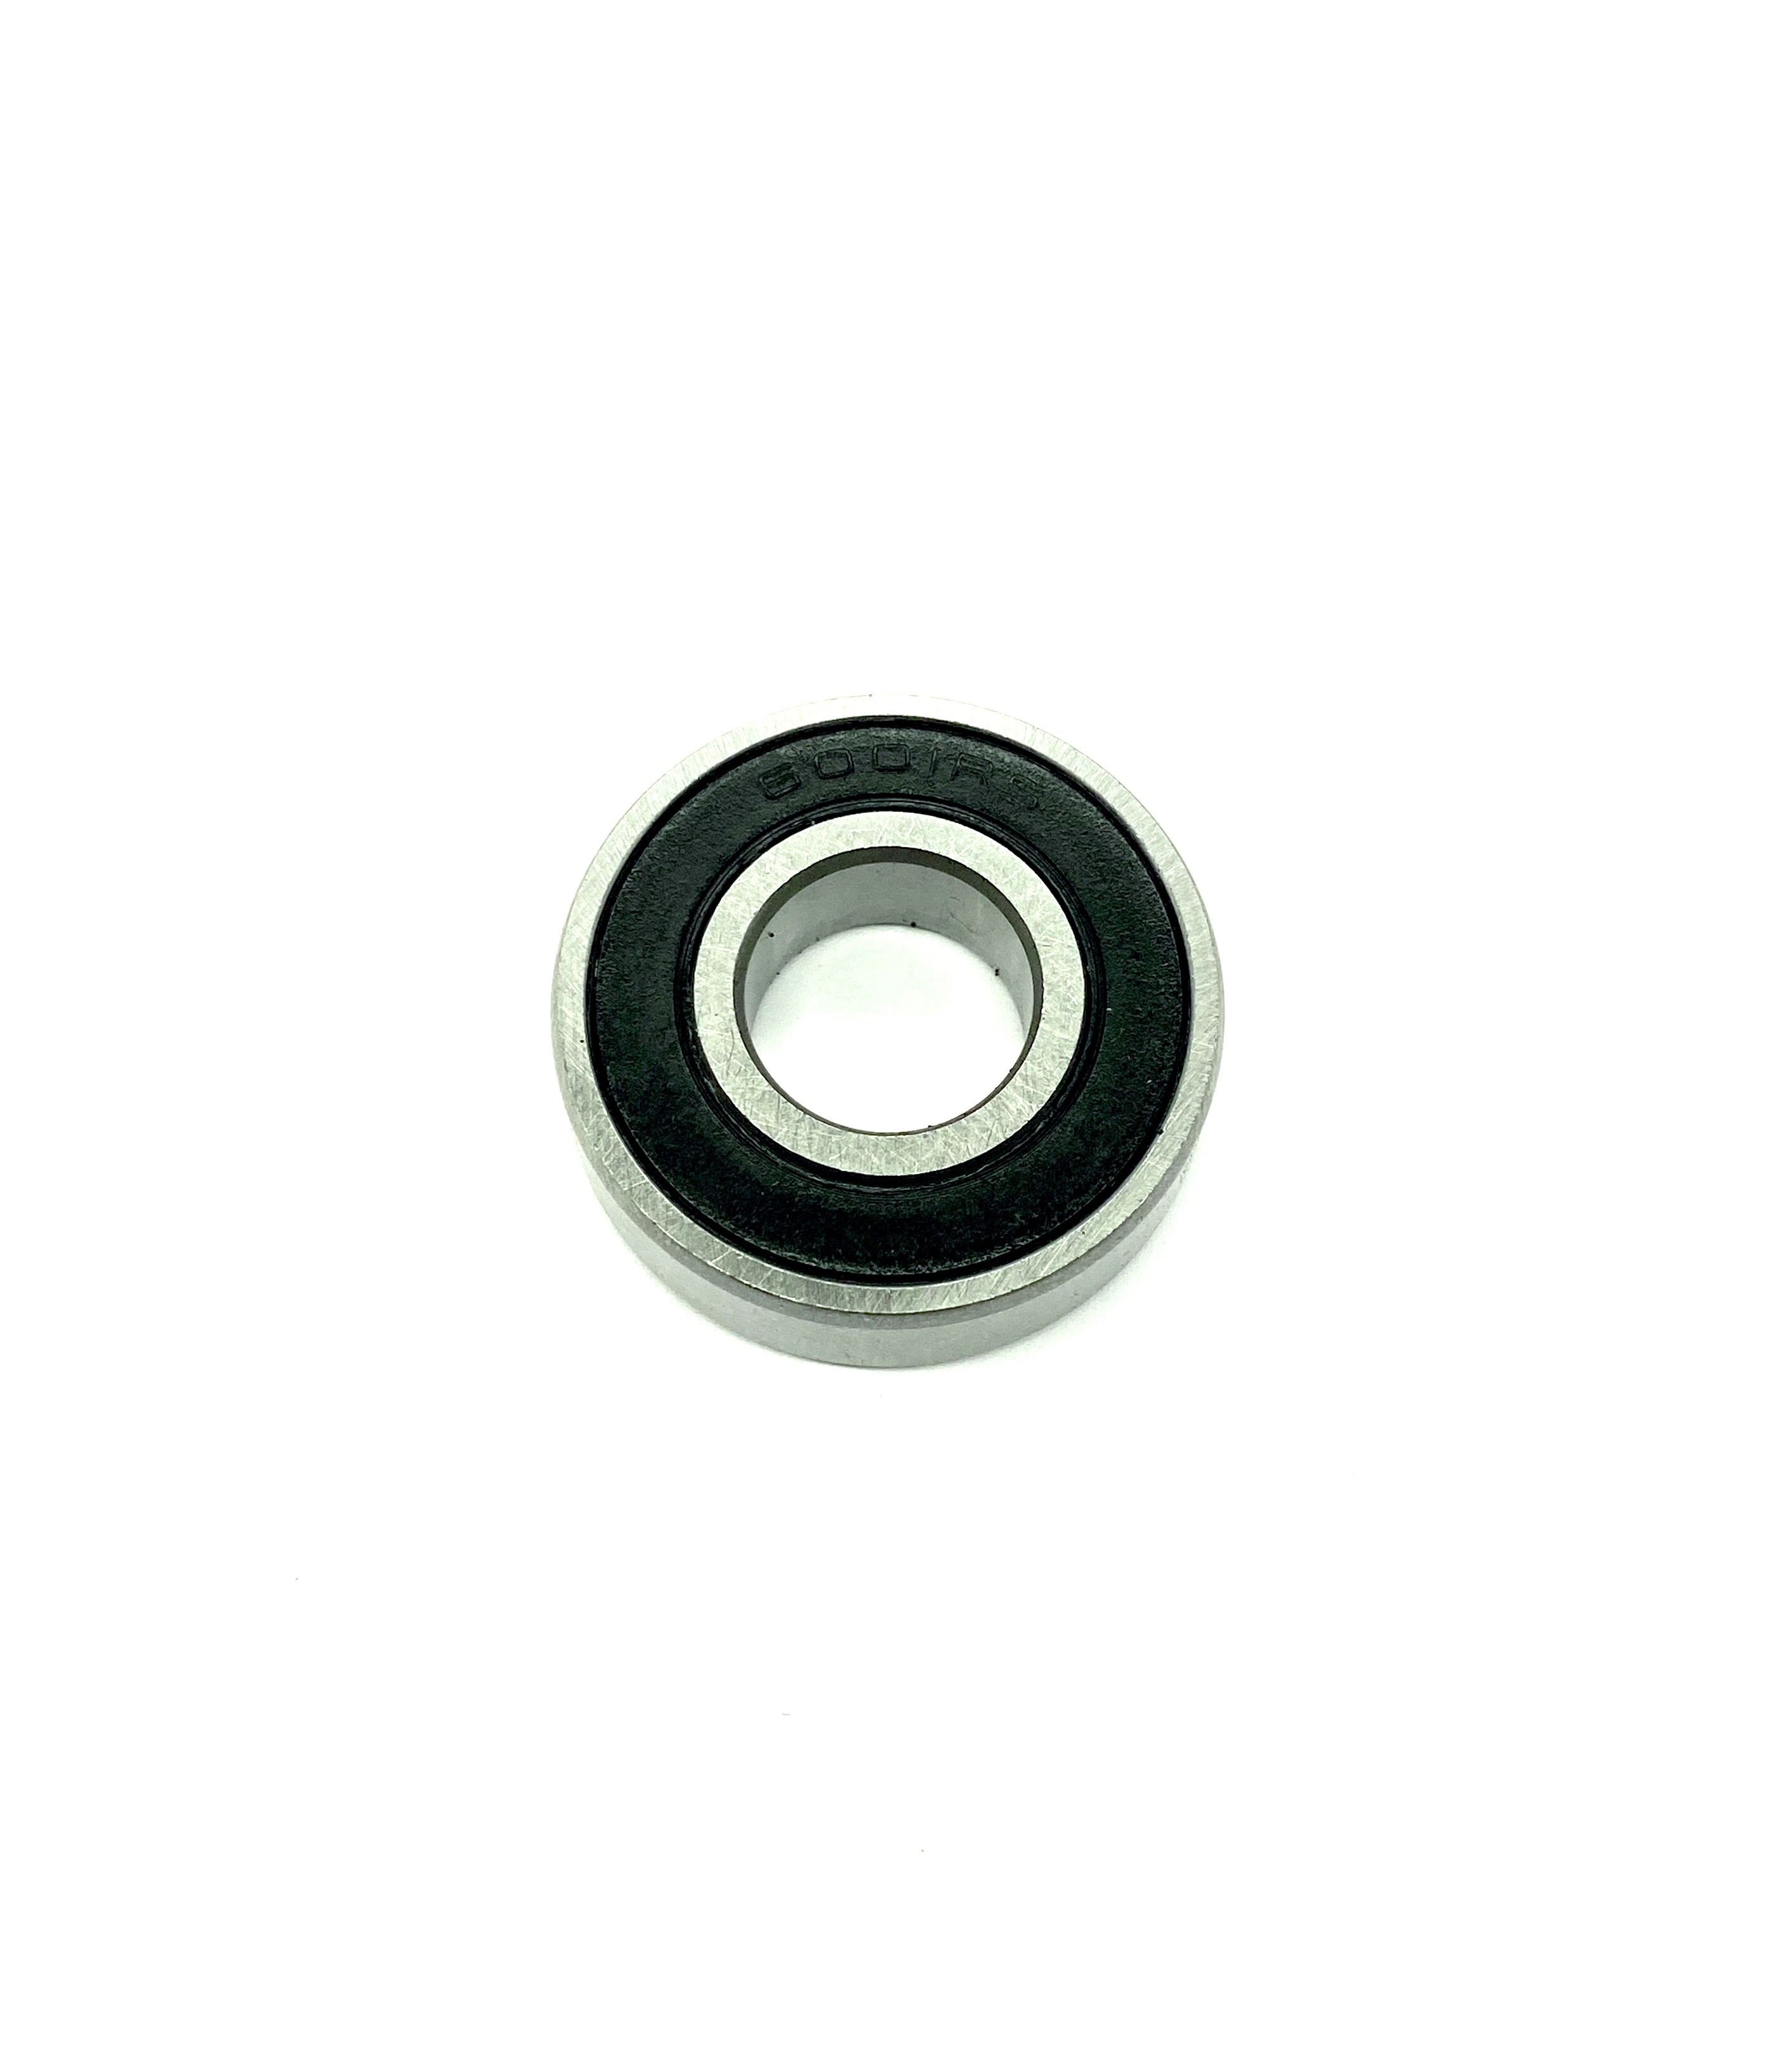 E-Twow Rear Bearing 6001-2RS